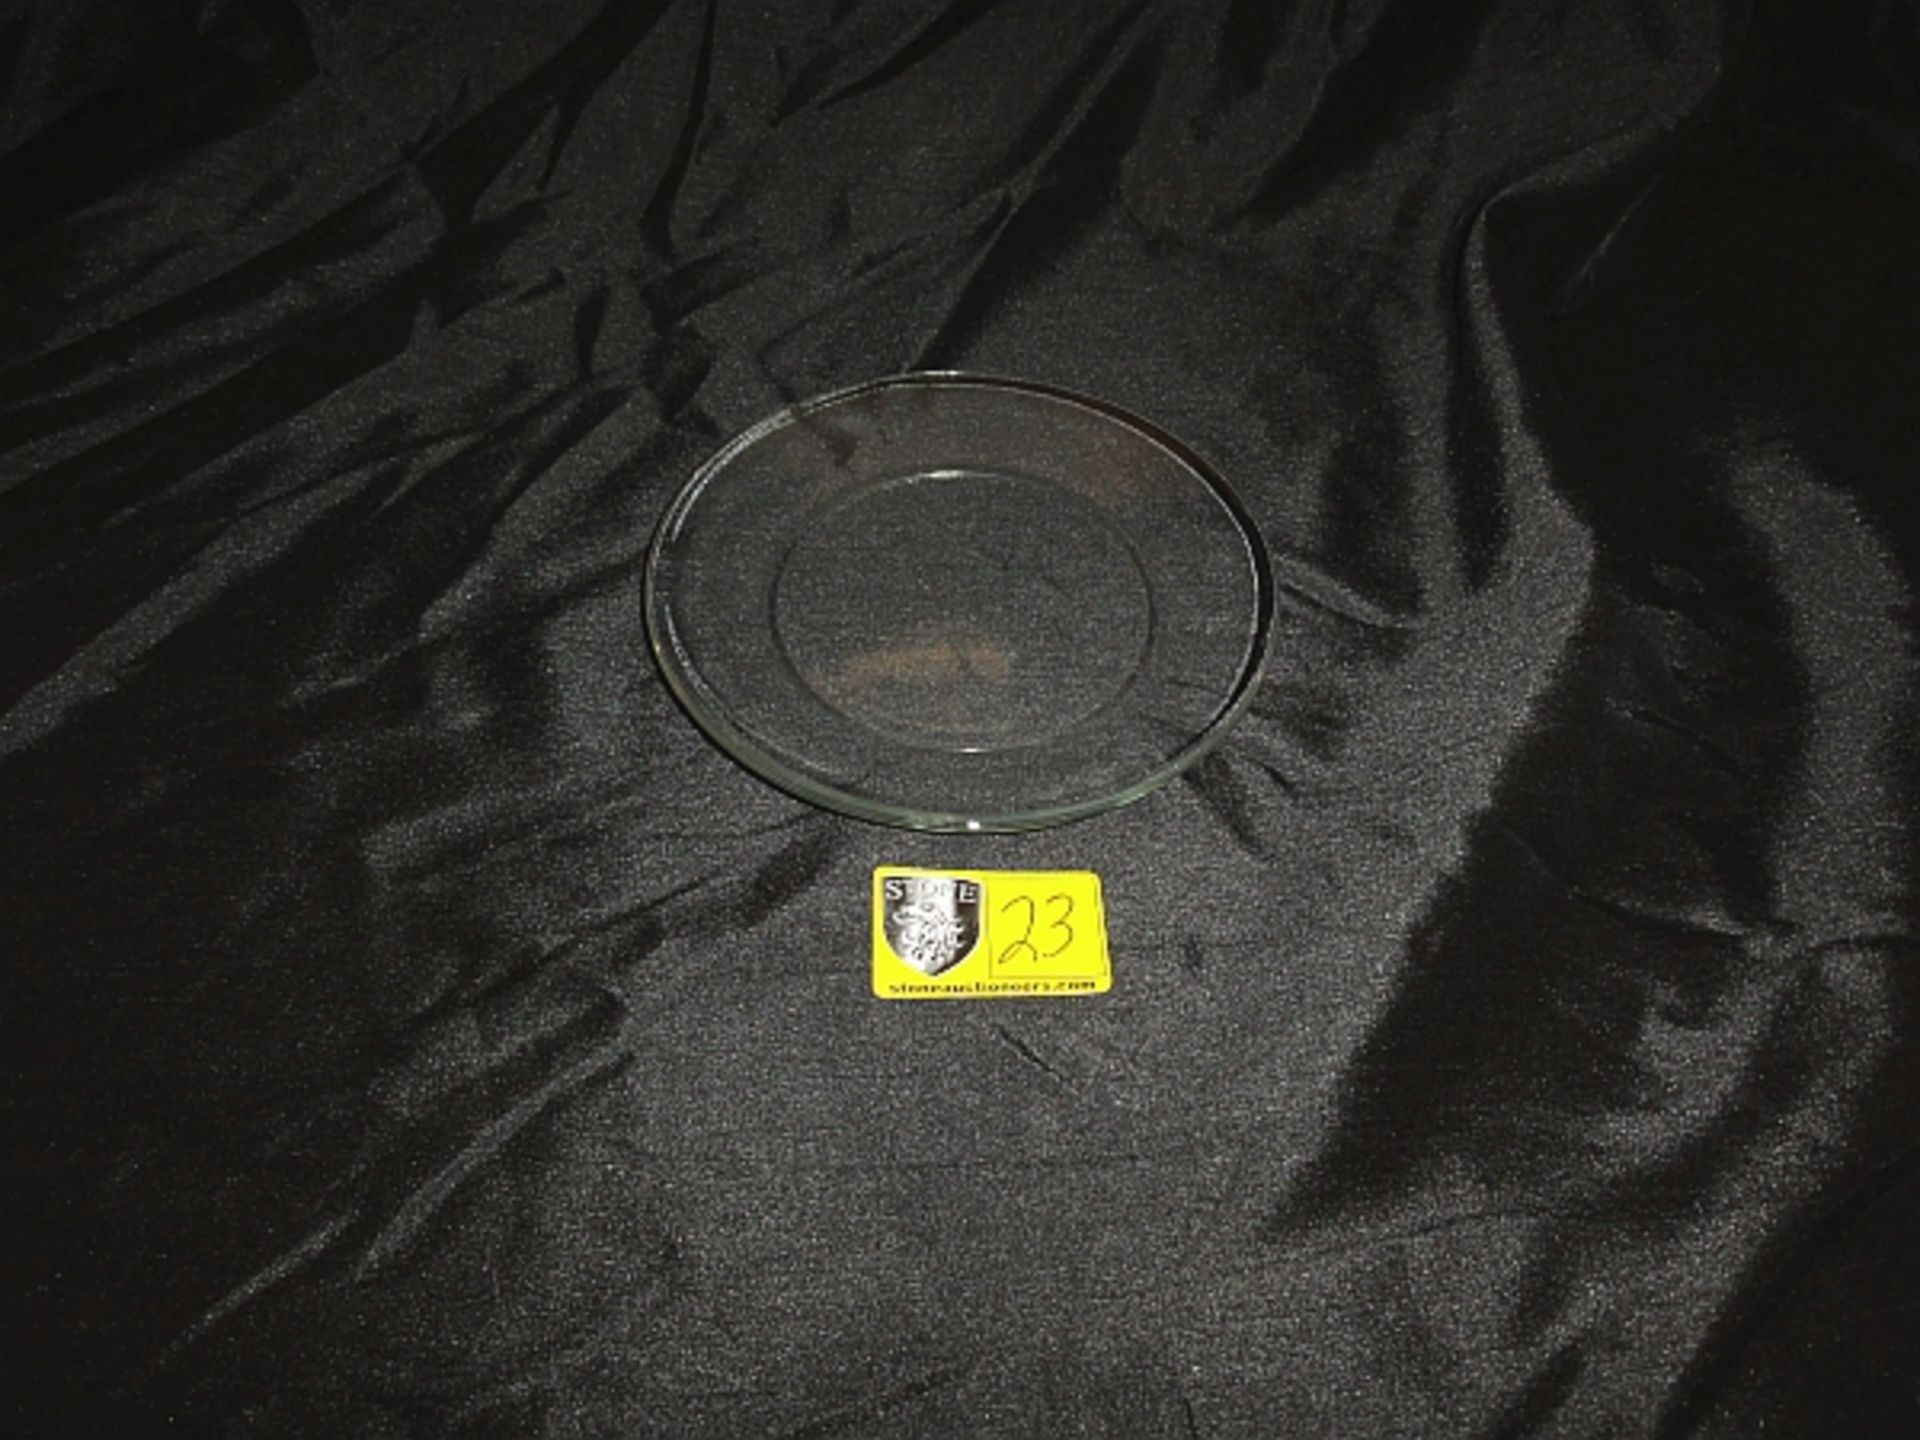 LOT OF 258 GLASS 8" ROUND PLATE- LOT COMES IN 10 MICROWIRE CRATES BILLED @ $18 EA.